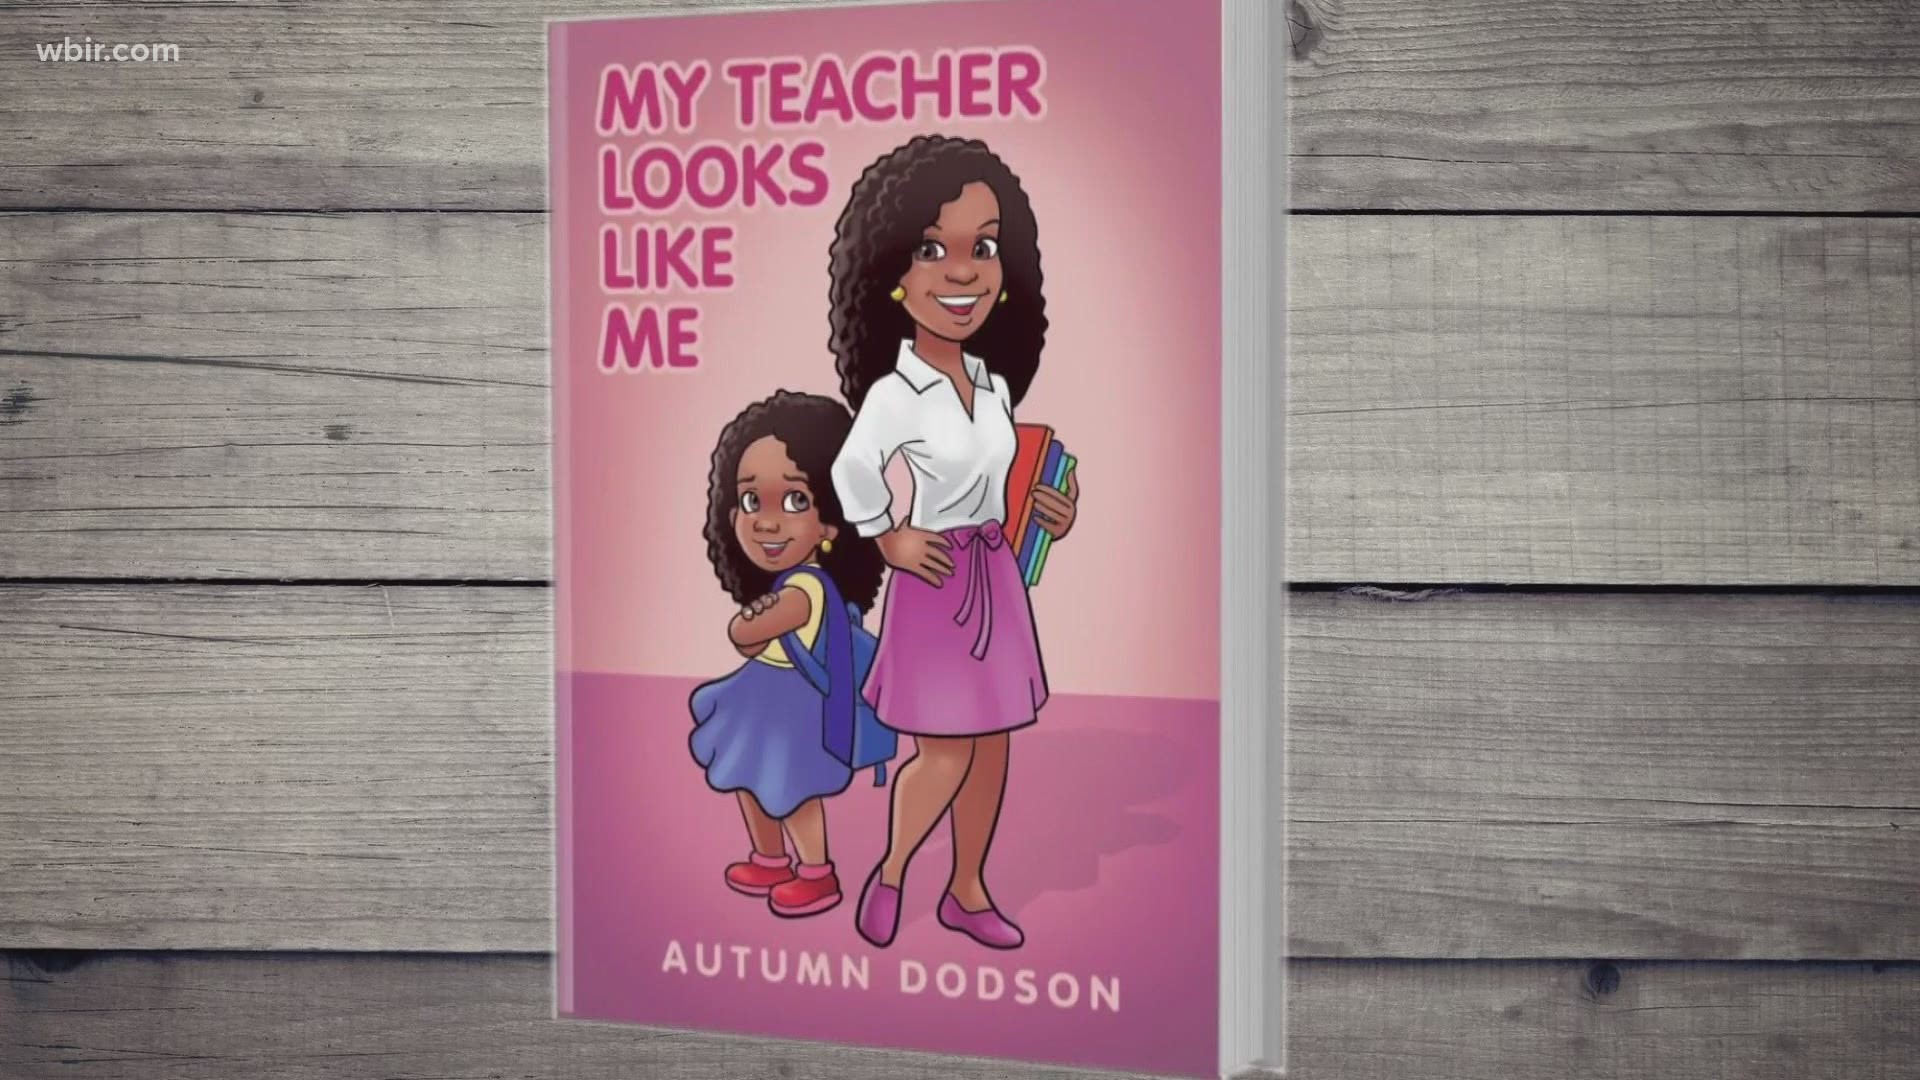 The 25-year-old second grade teacher says the book focuses on the importance of diversity and differences, in a kid-friendly way.